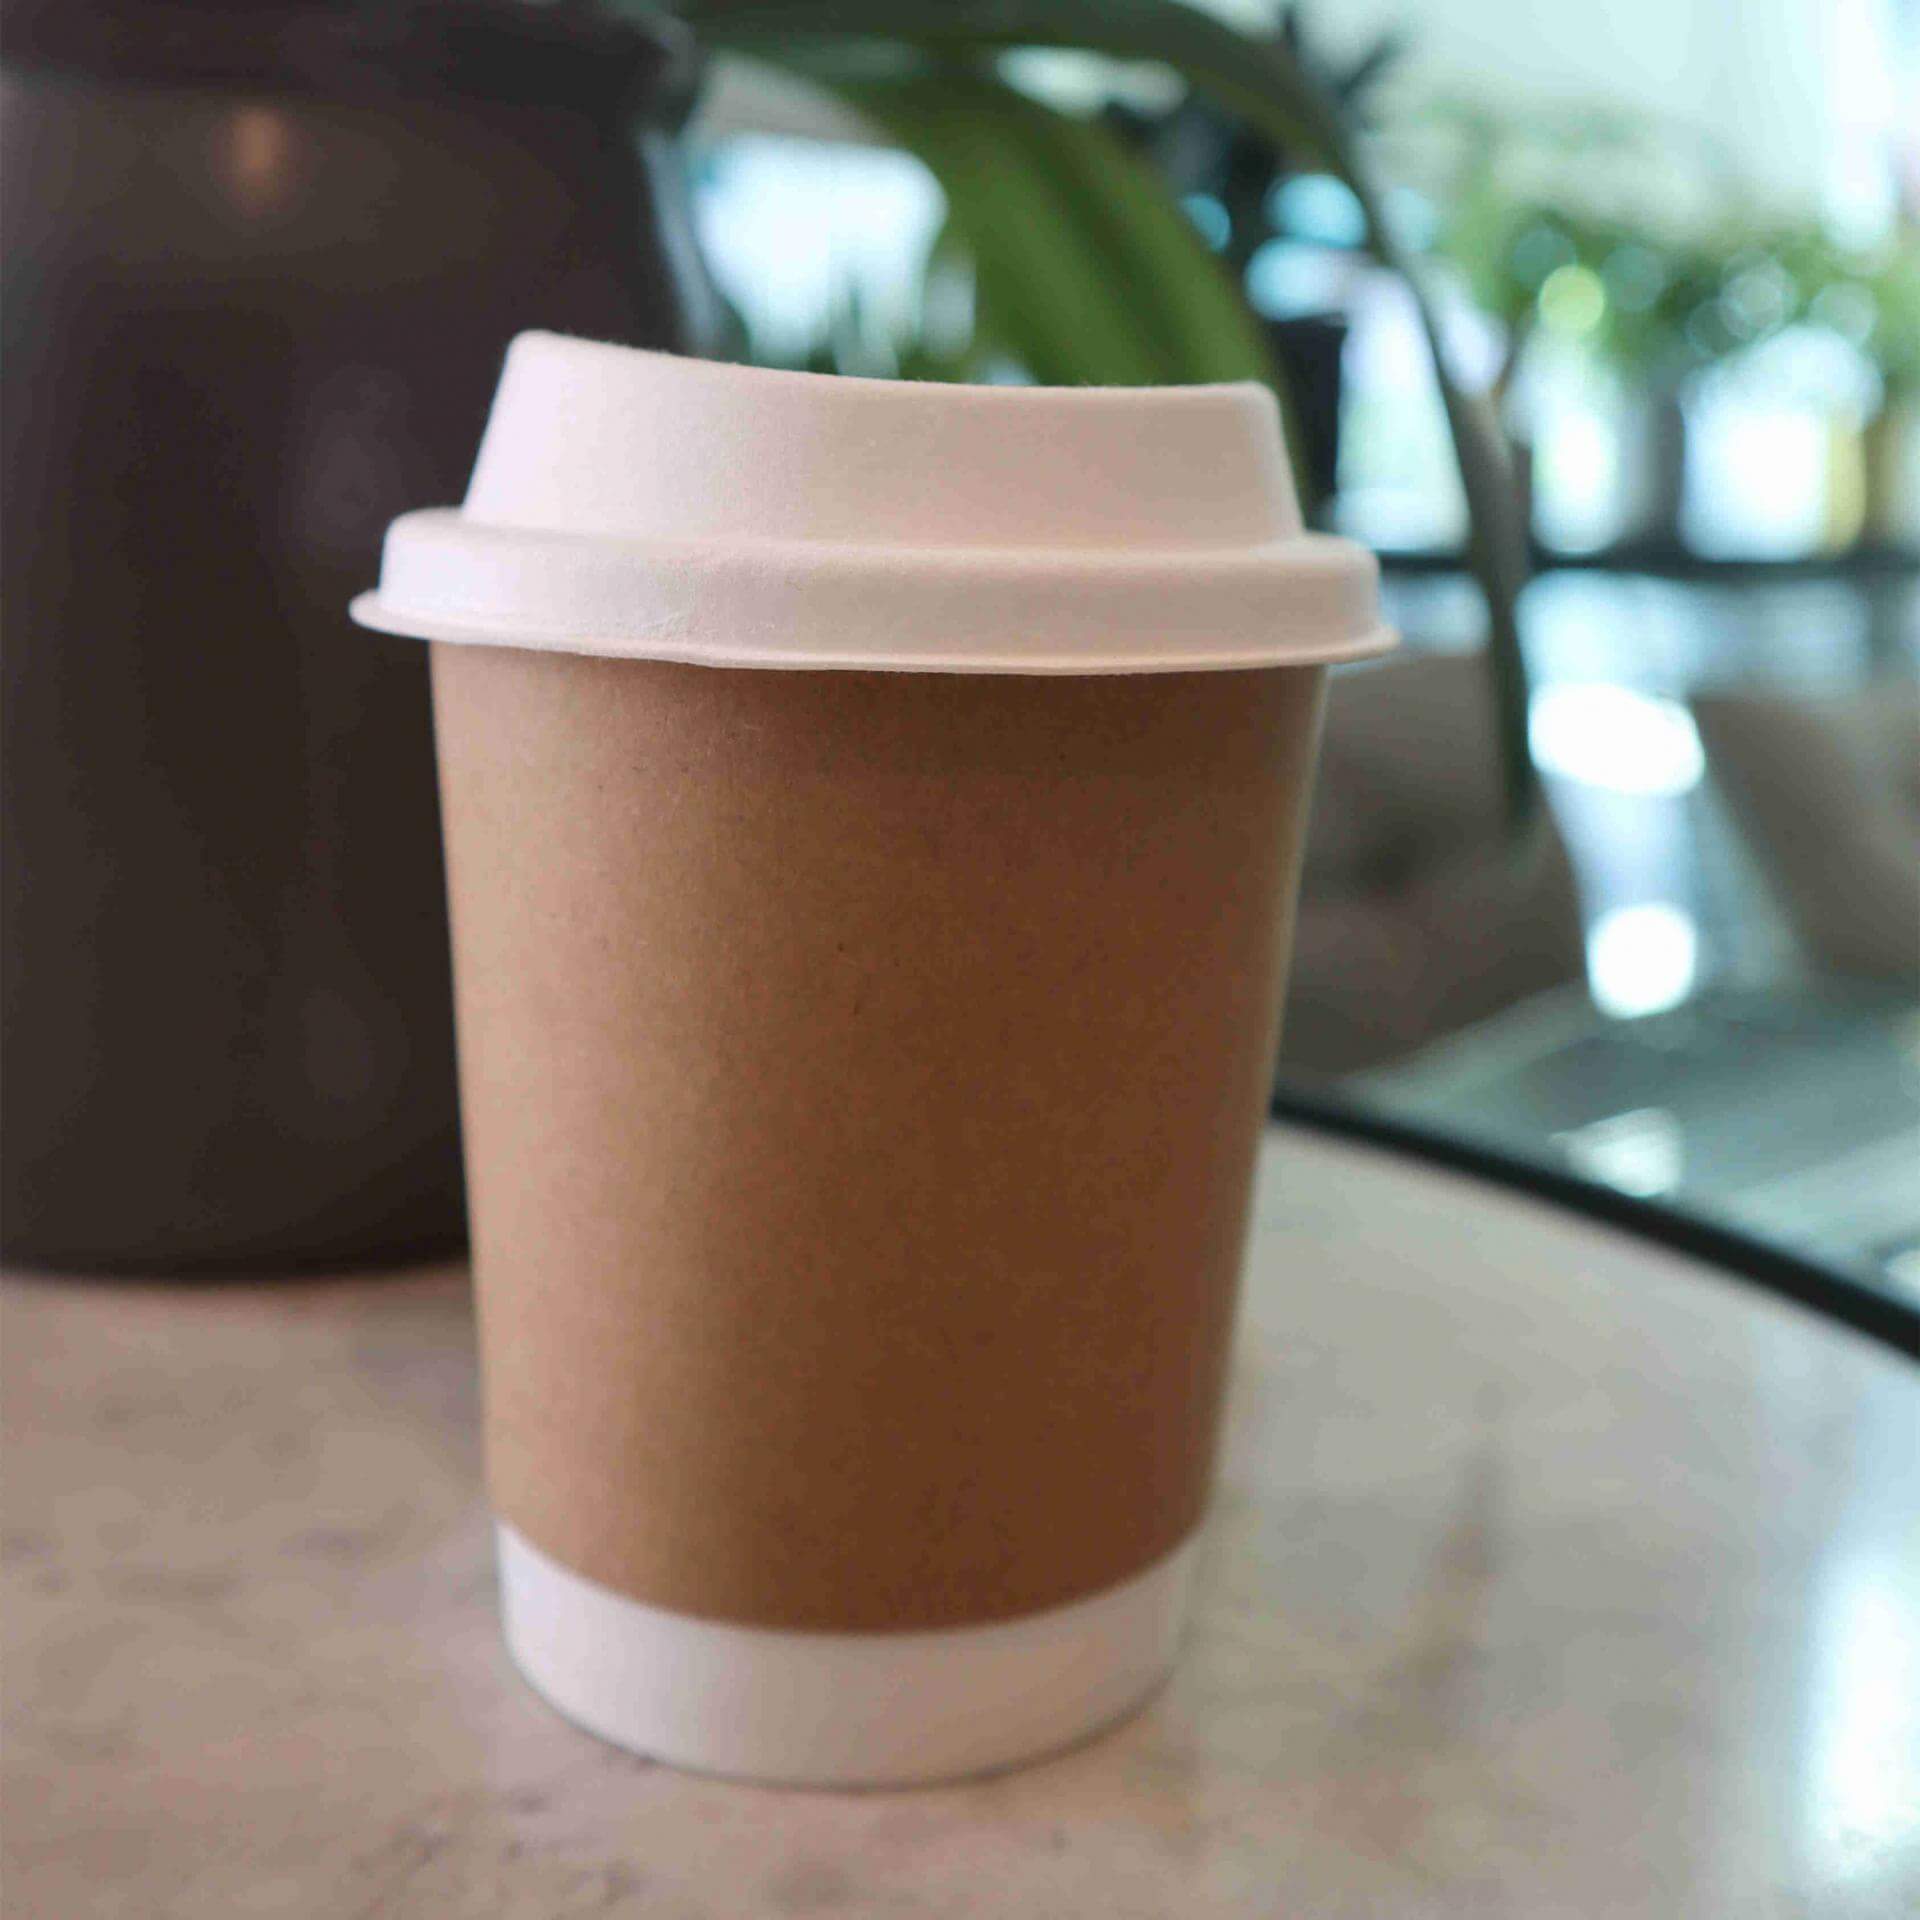 90mm white disposable coffee cups with lids